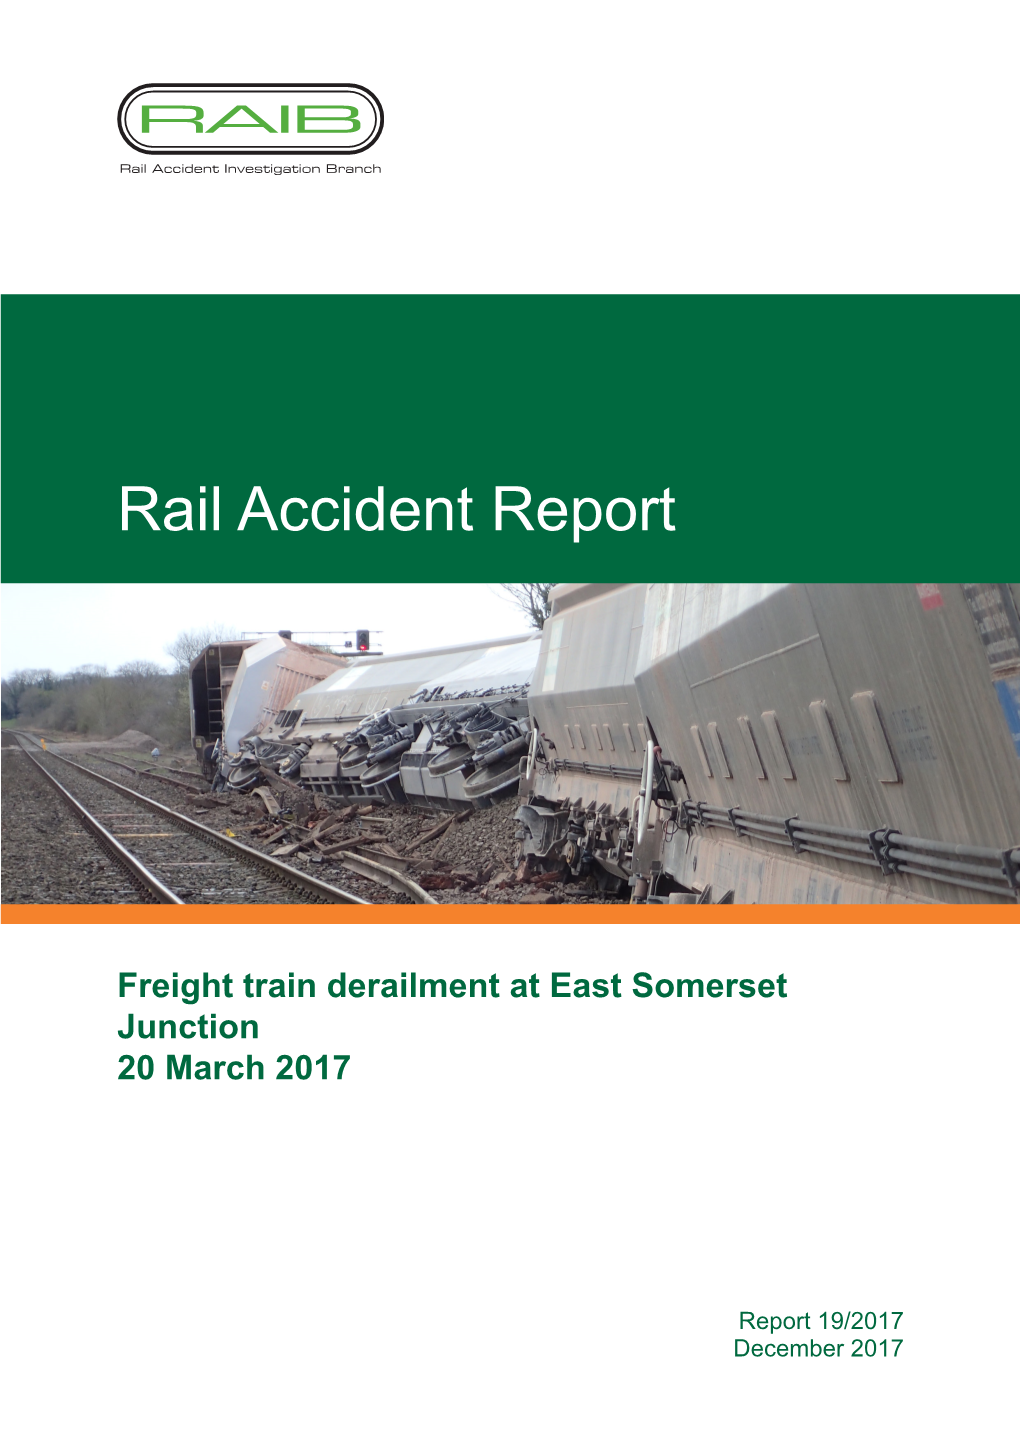 East Somerset Junction 20 March 2017